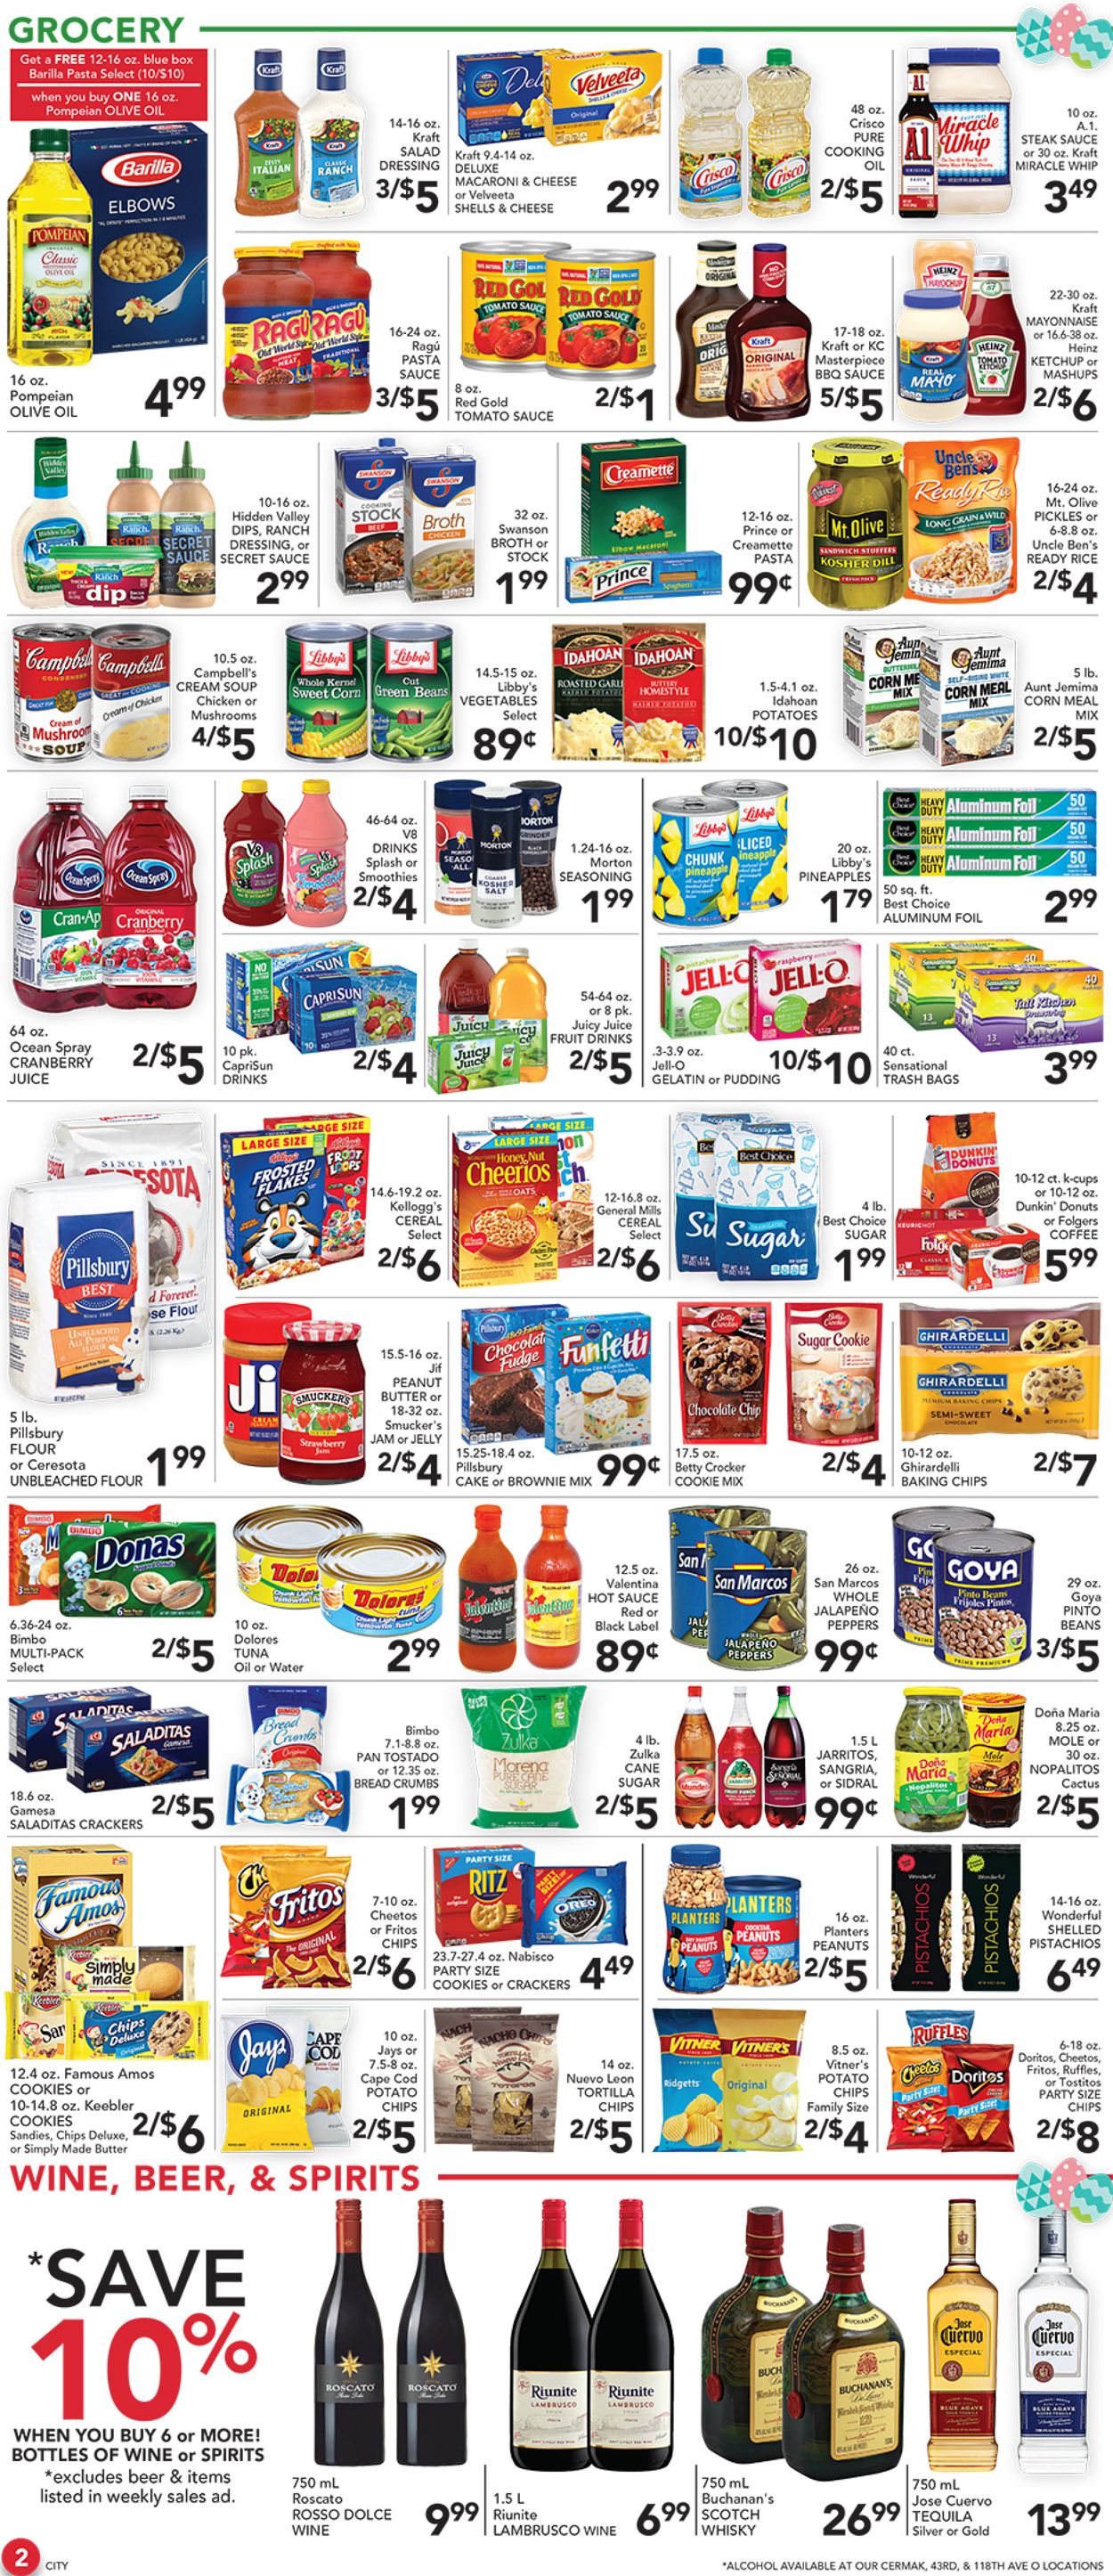 Pete's Fresh Market Easter 2021 ad Weekly Ad Circular - valid 03/31-04/06/2021 (Page 2)